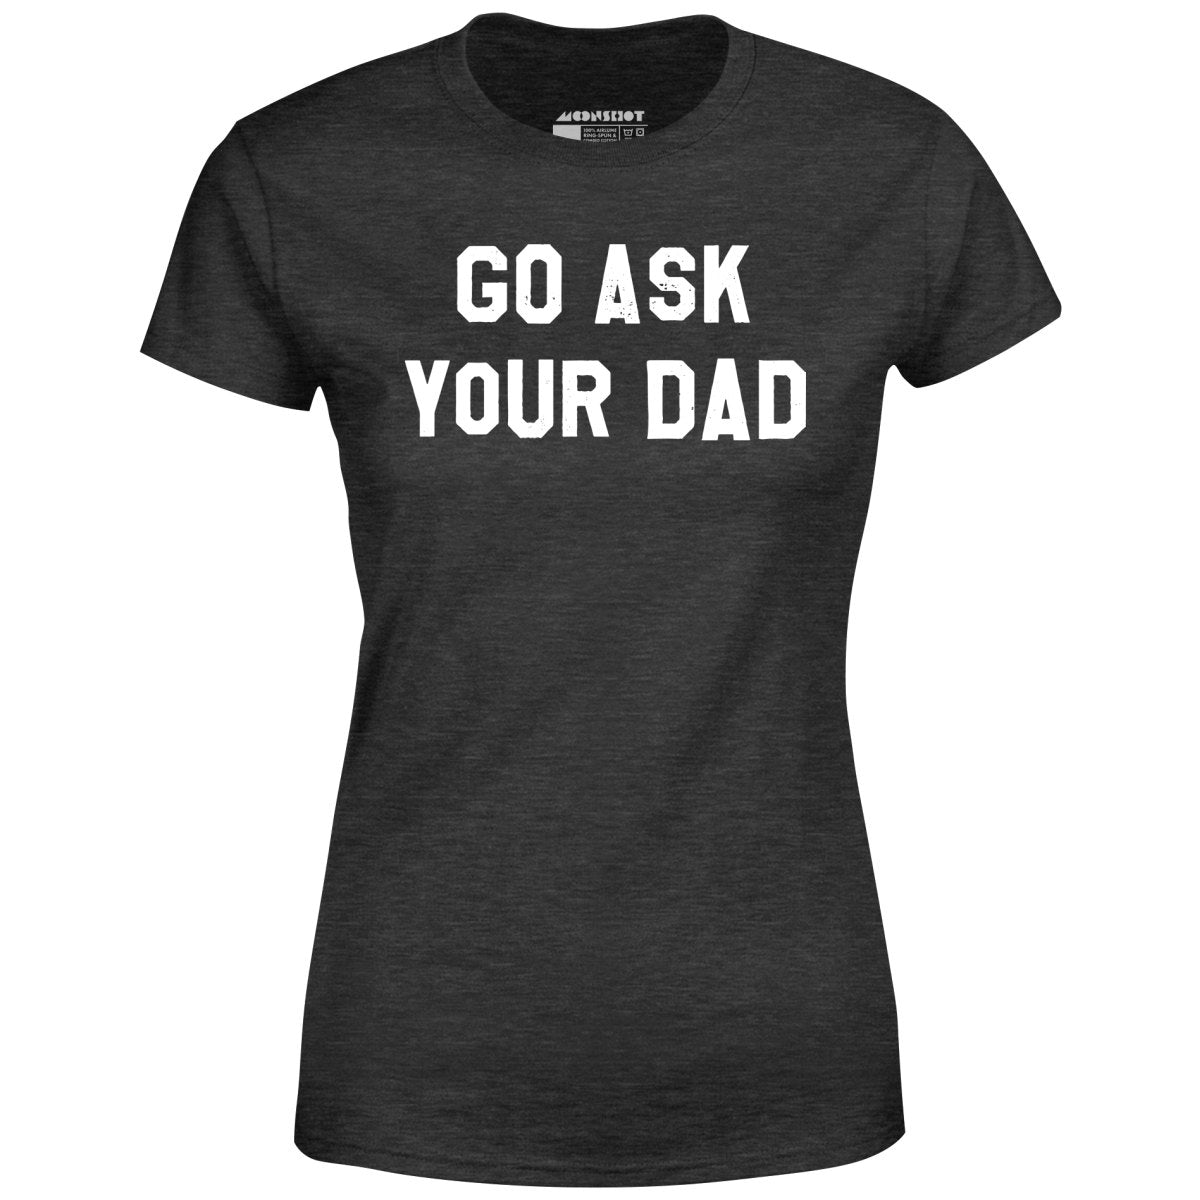 Go Ask Your Dad - Women's T-Shirt